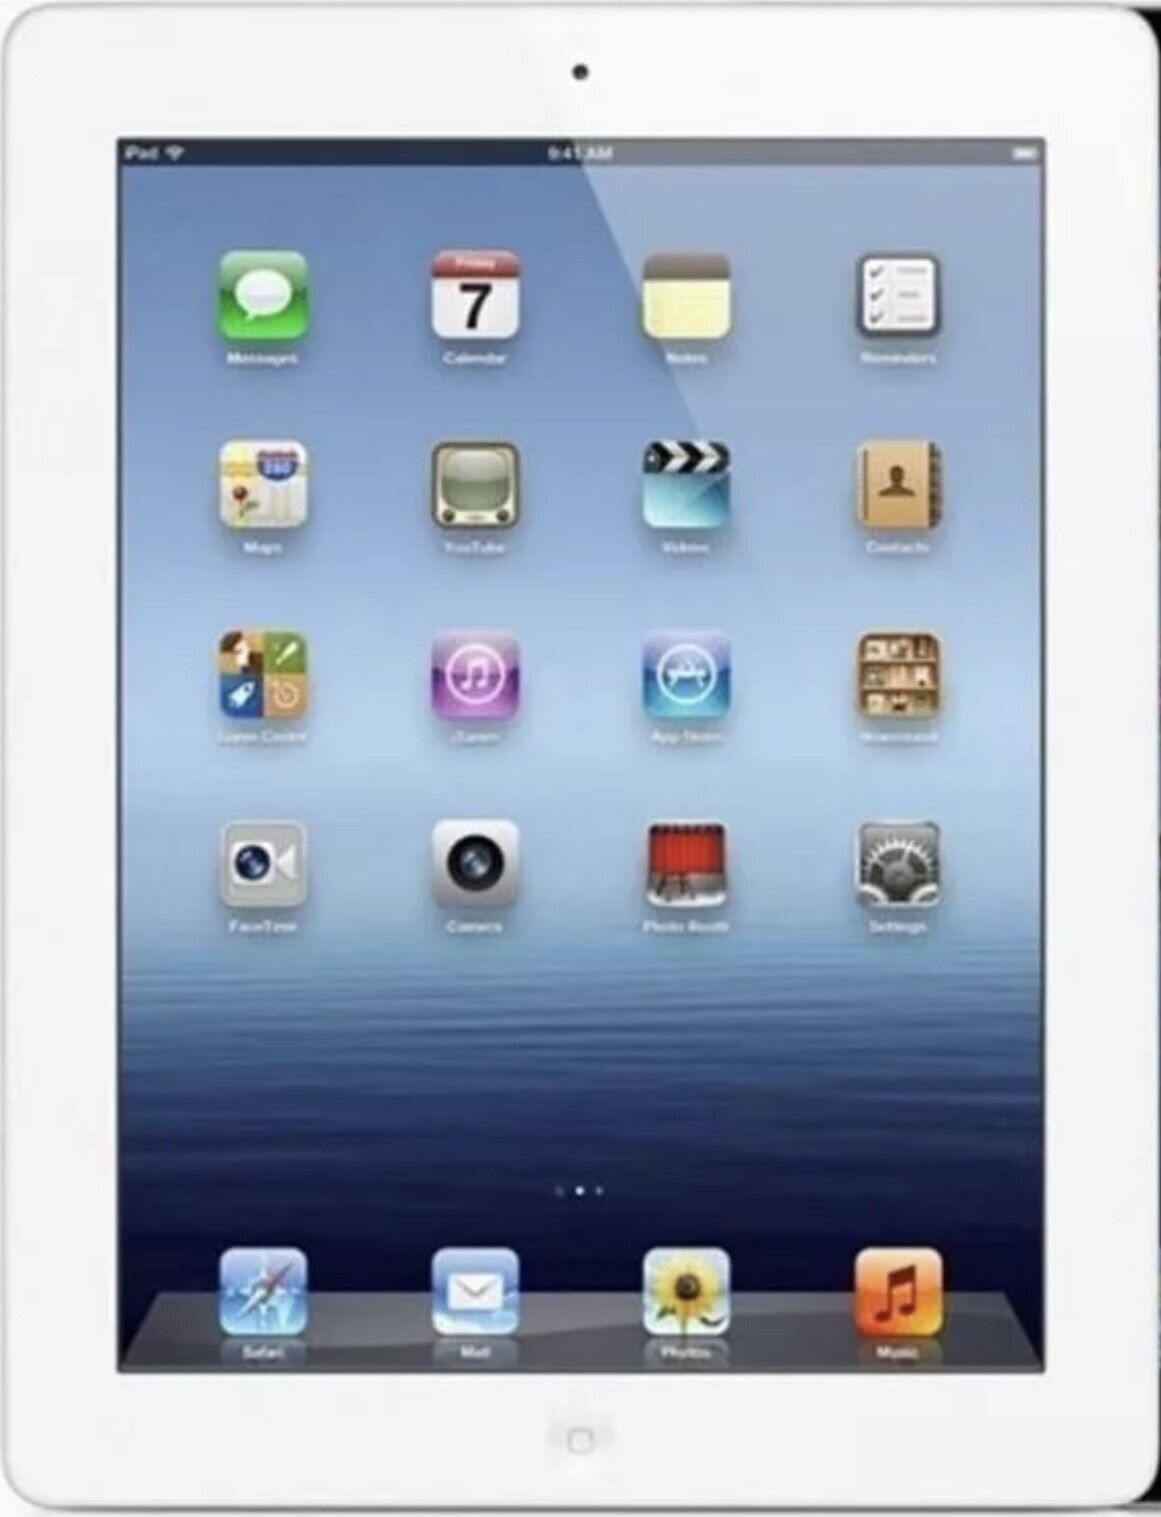 Apple iPad - 4th Generation - Model #1458 - Wi-Fi Only - 9.7in - White/Silver